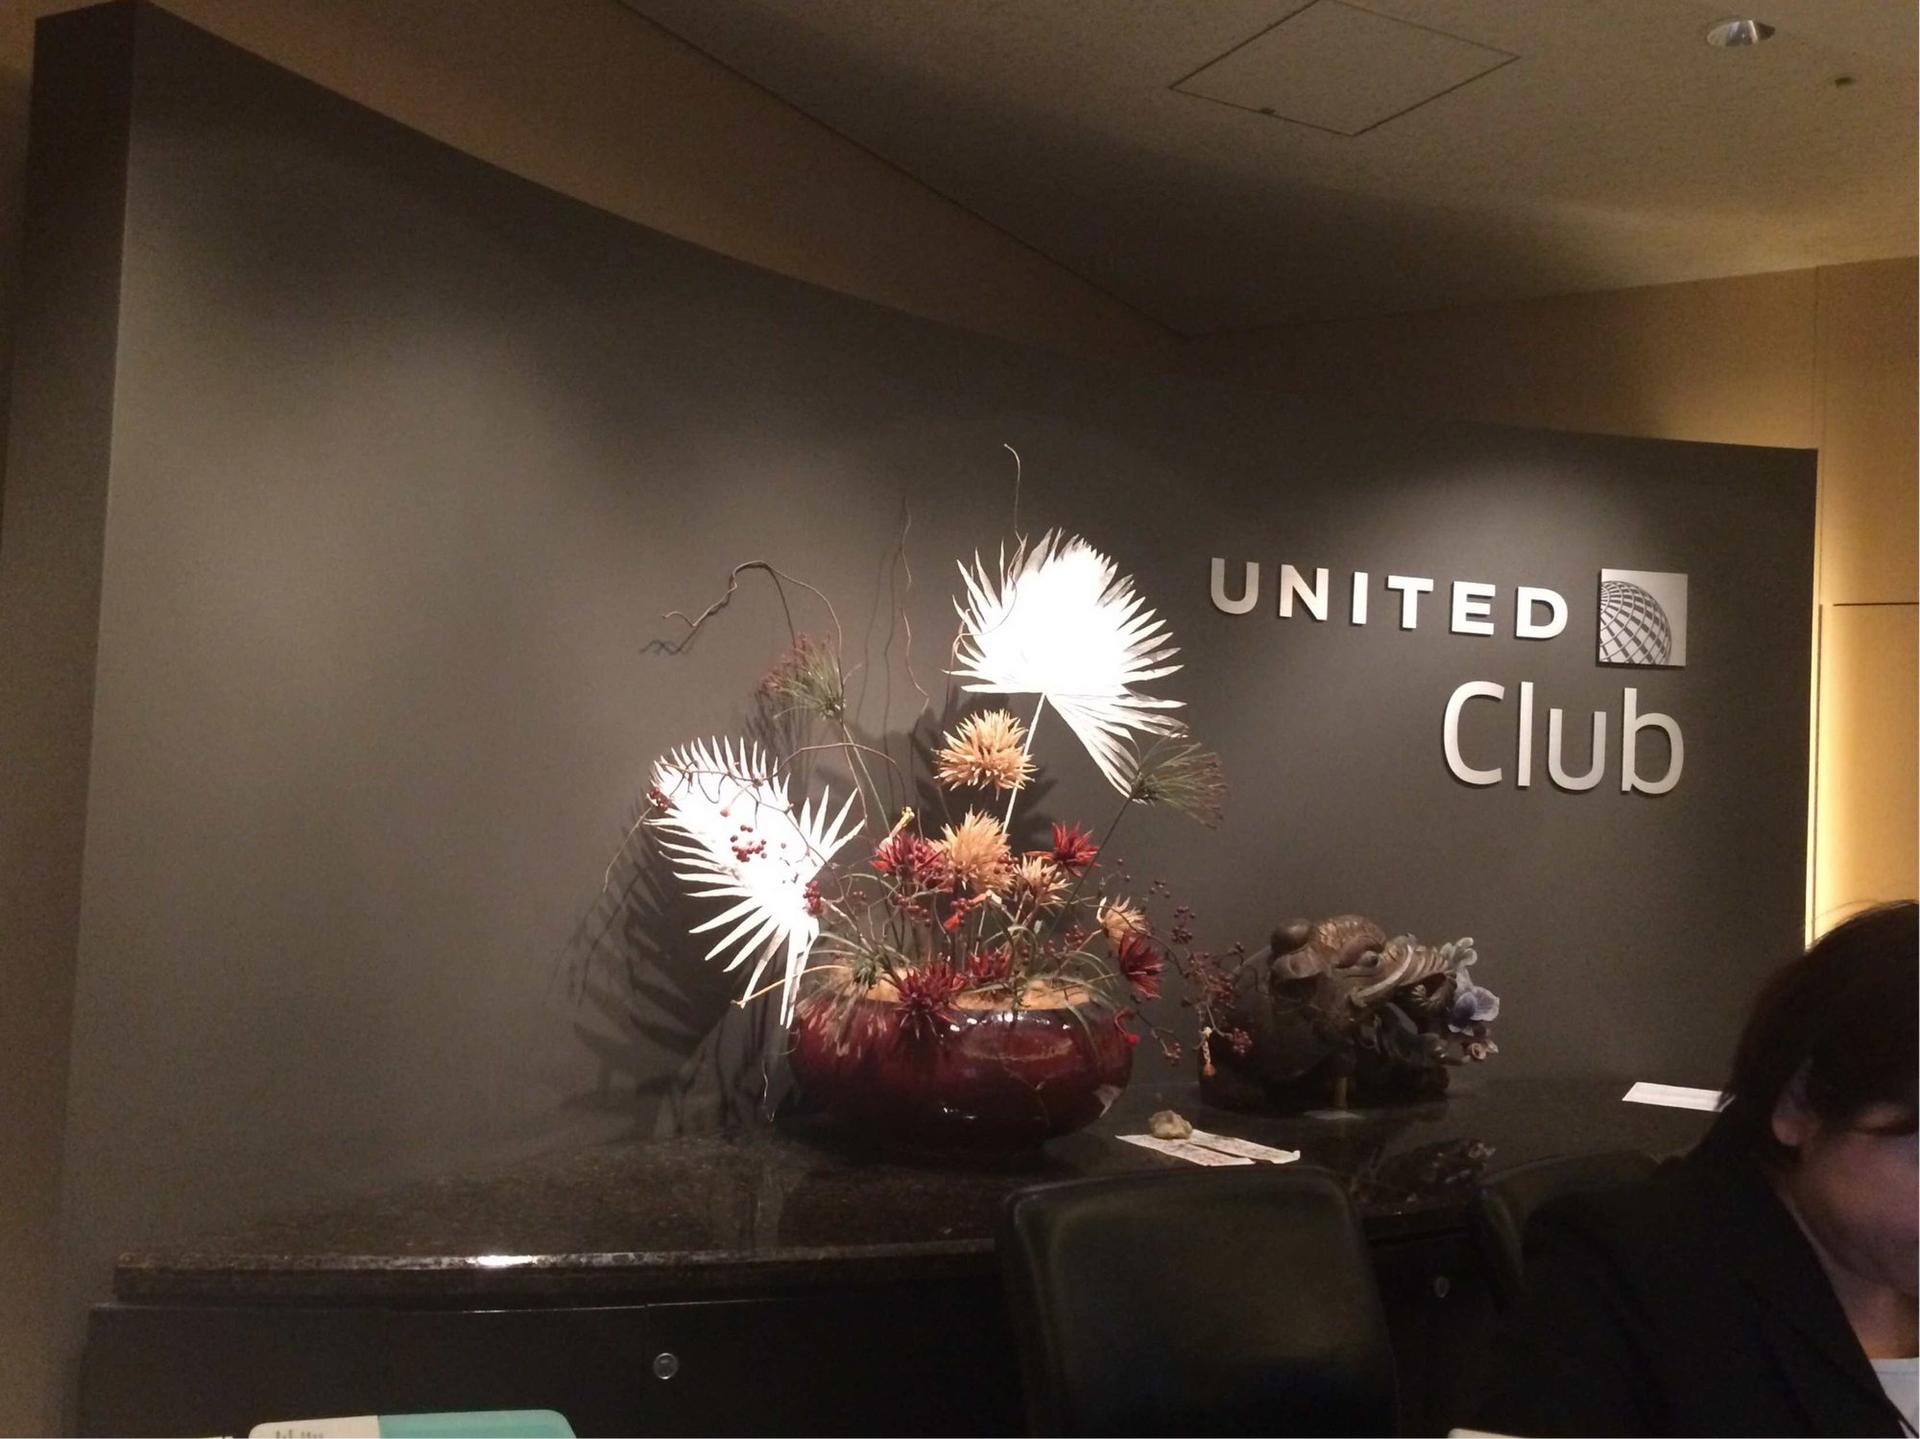 United Airlines United Club image 29 of 52